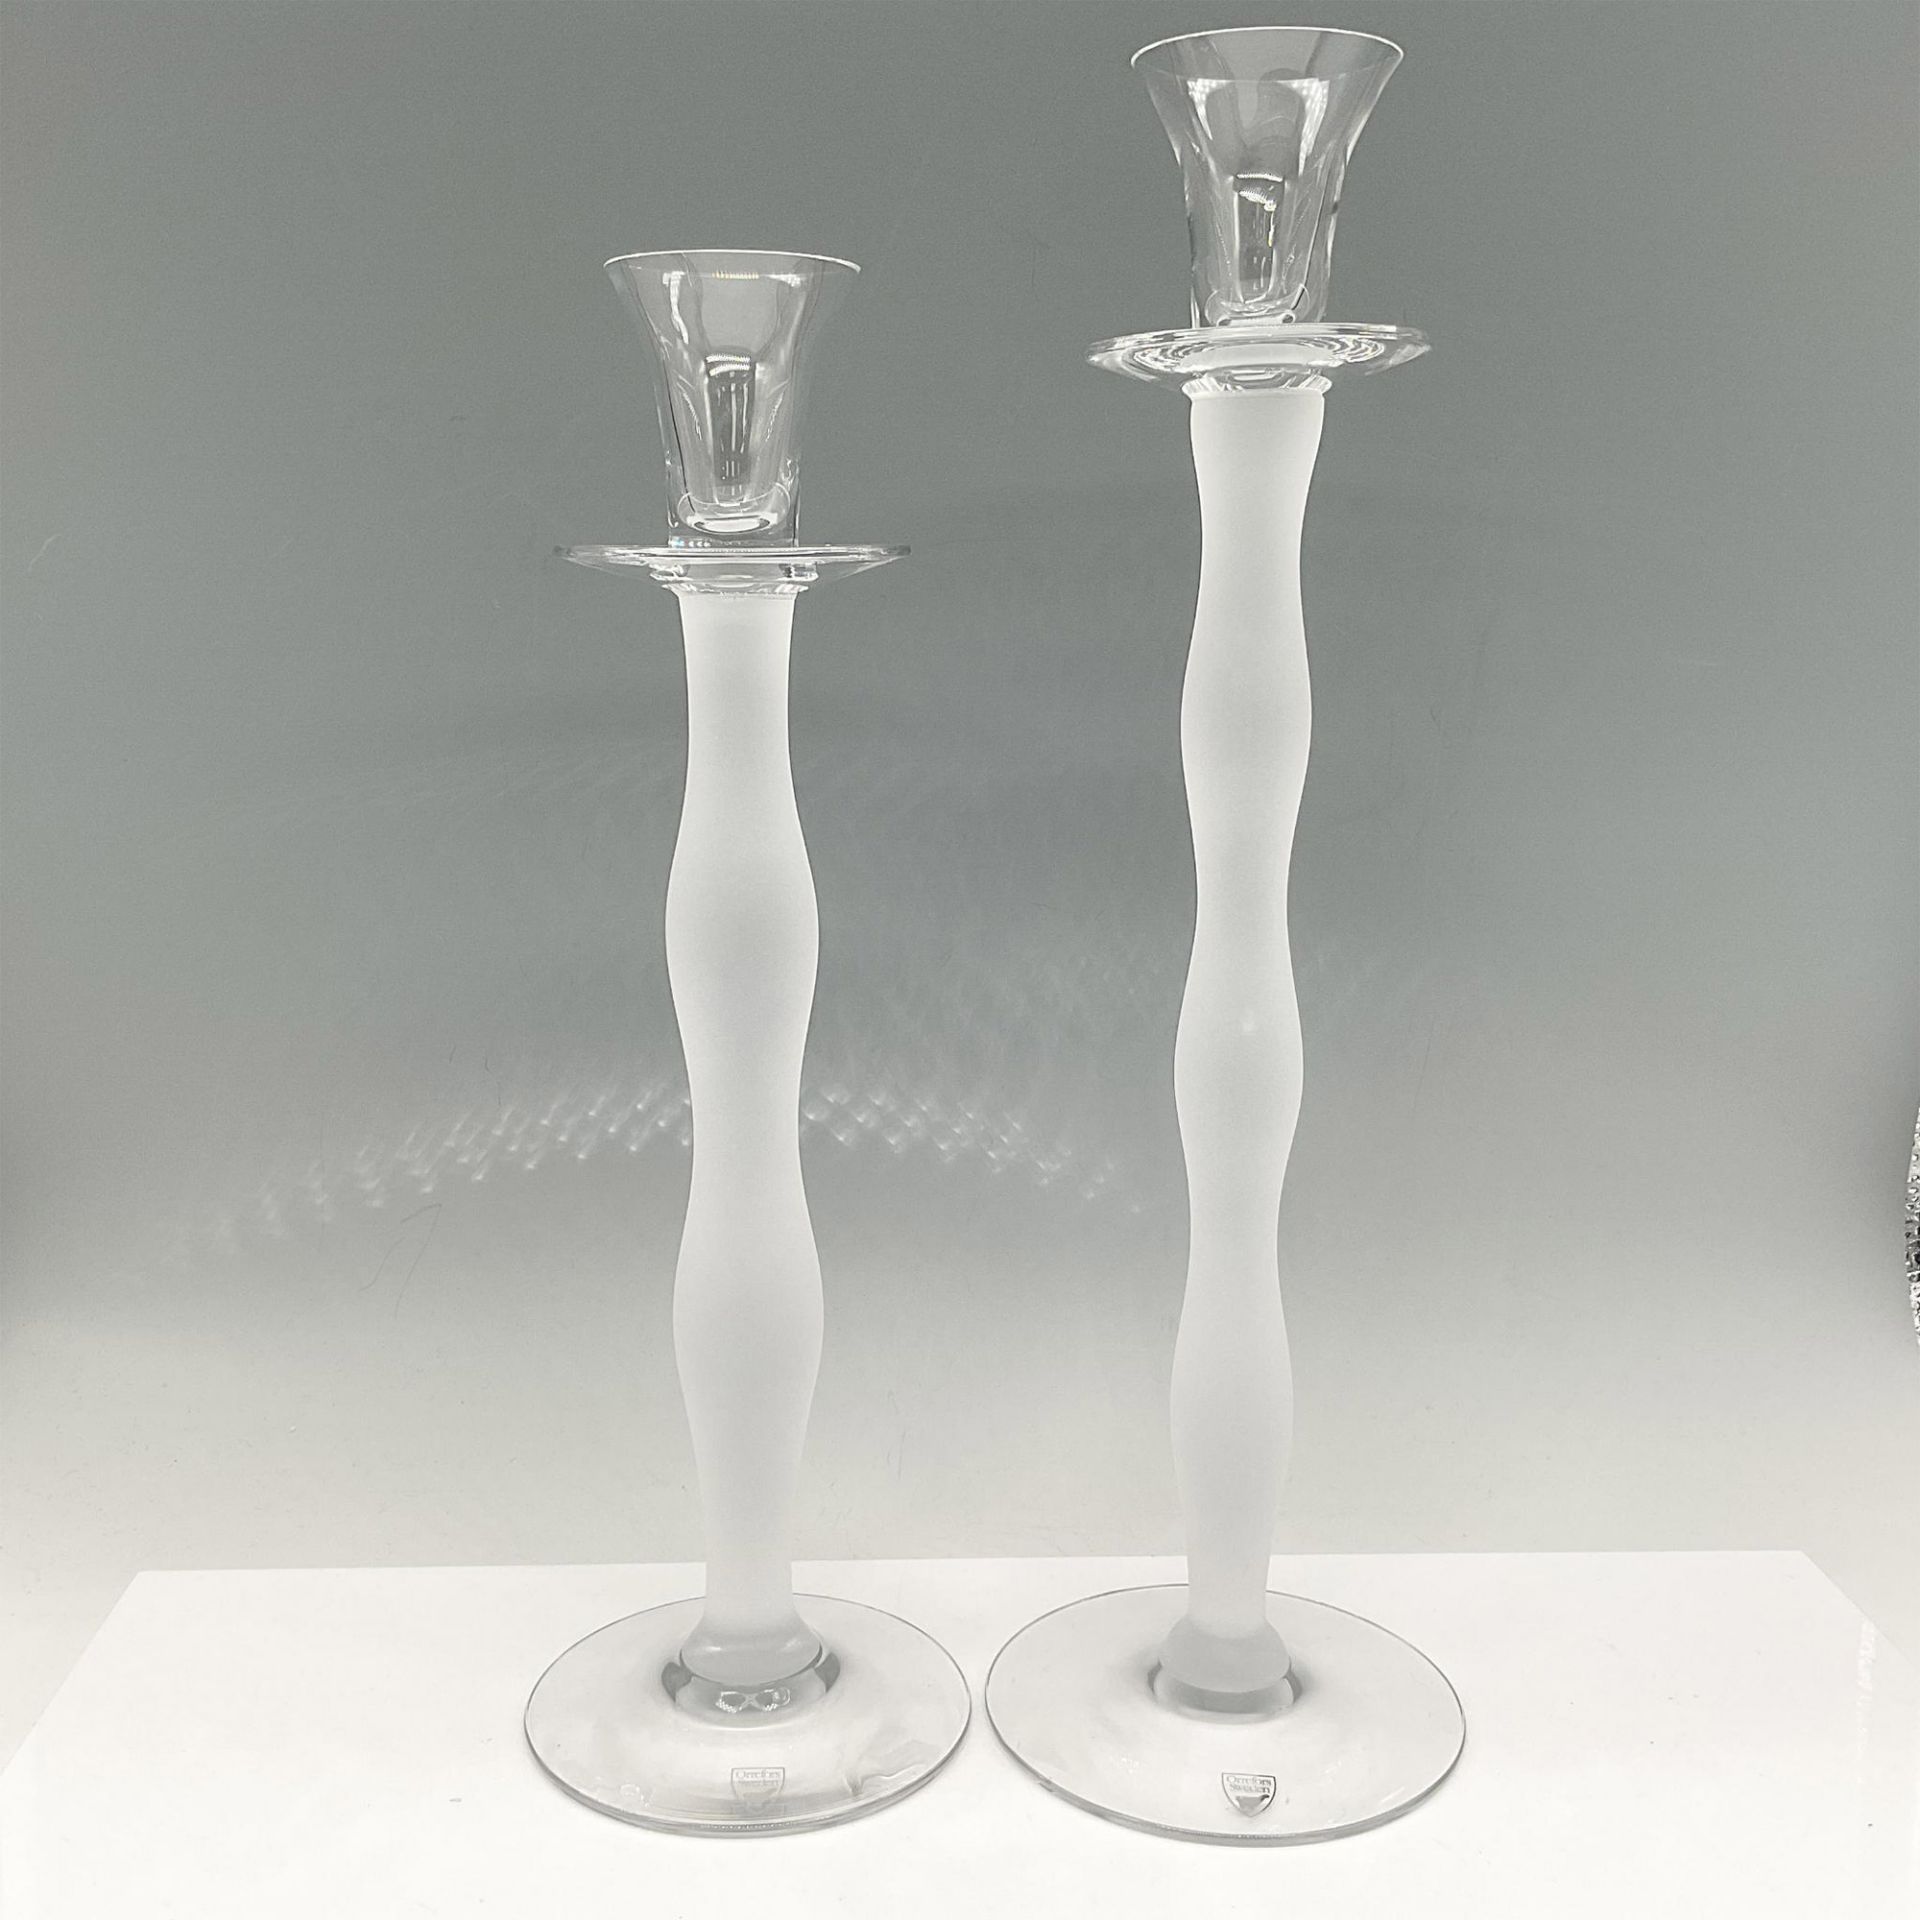 2pc Orrefors Crystal Frosted White Candle Holders, Celeste